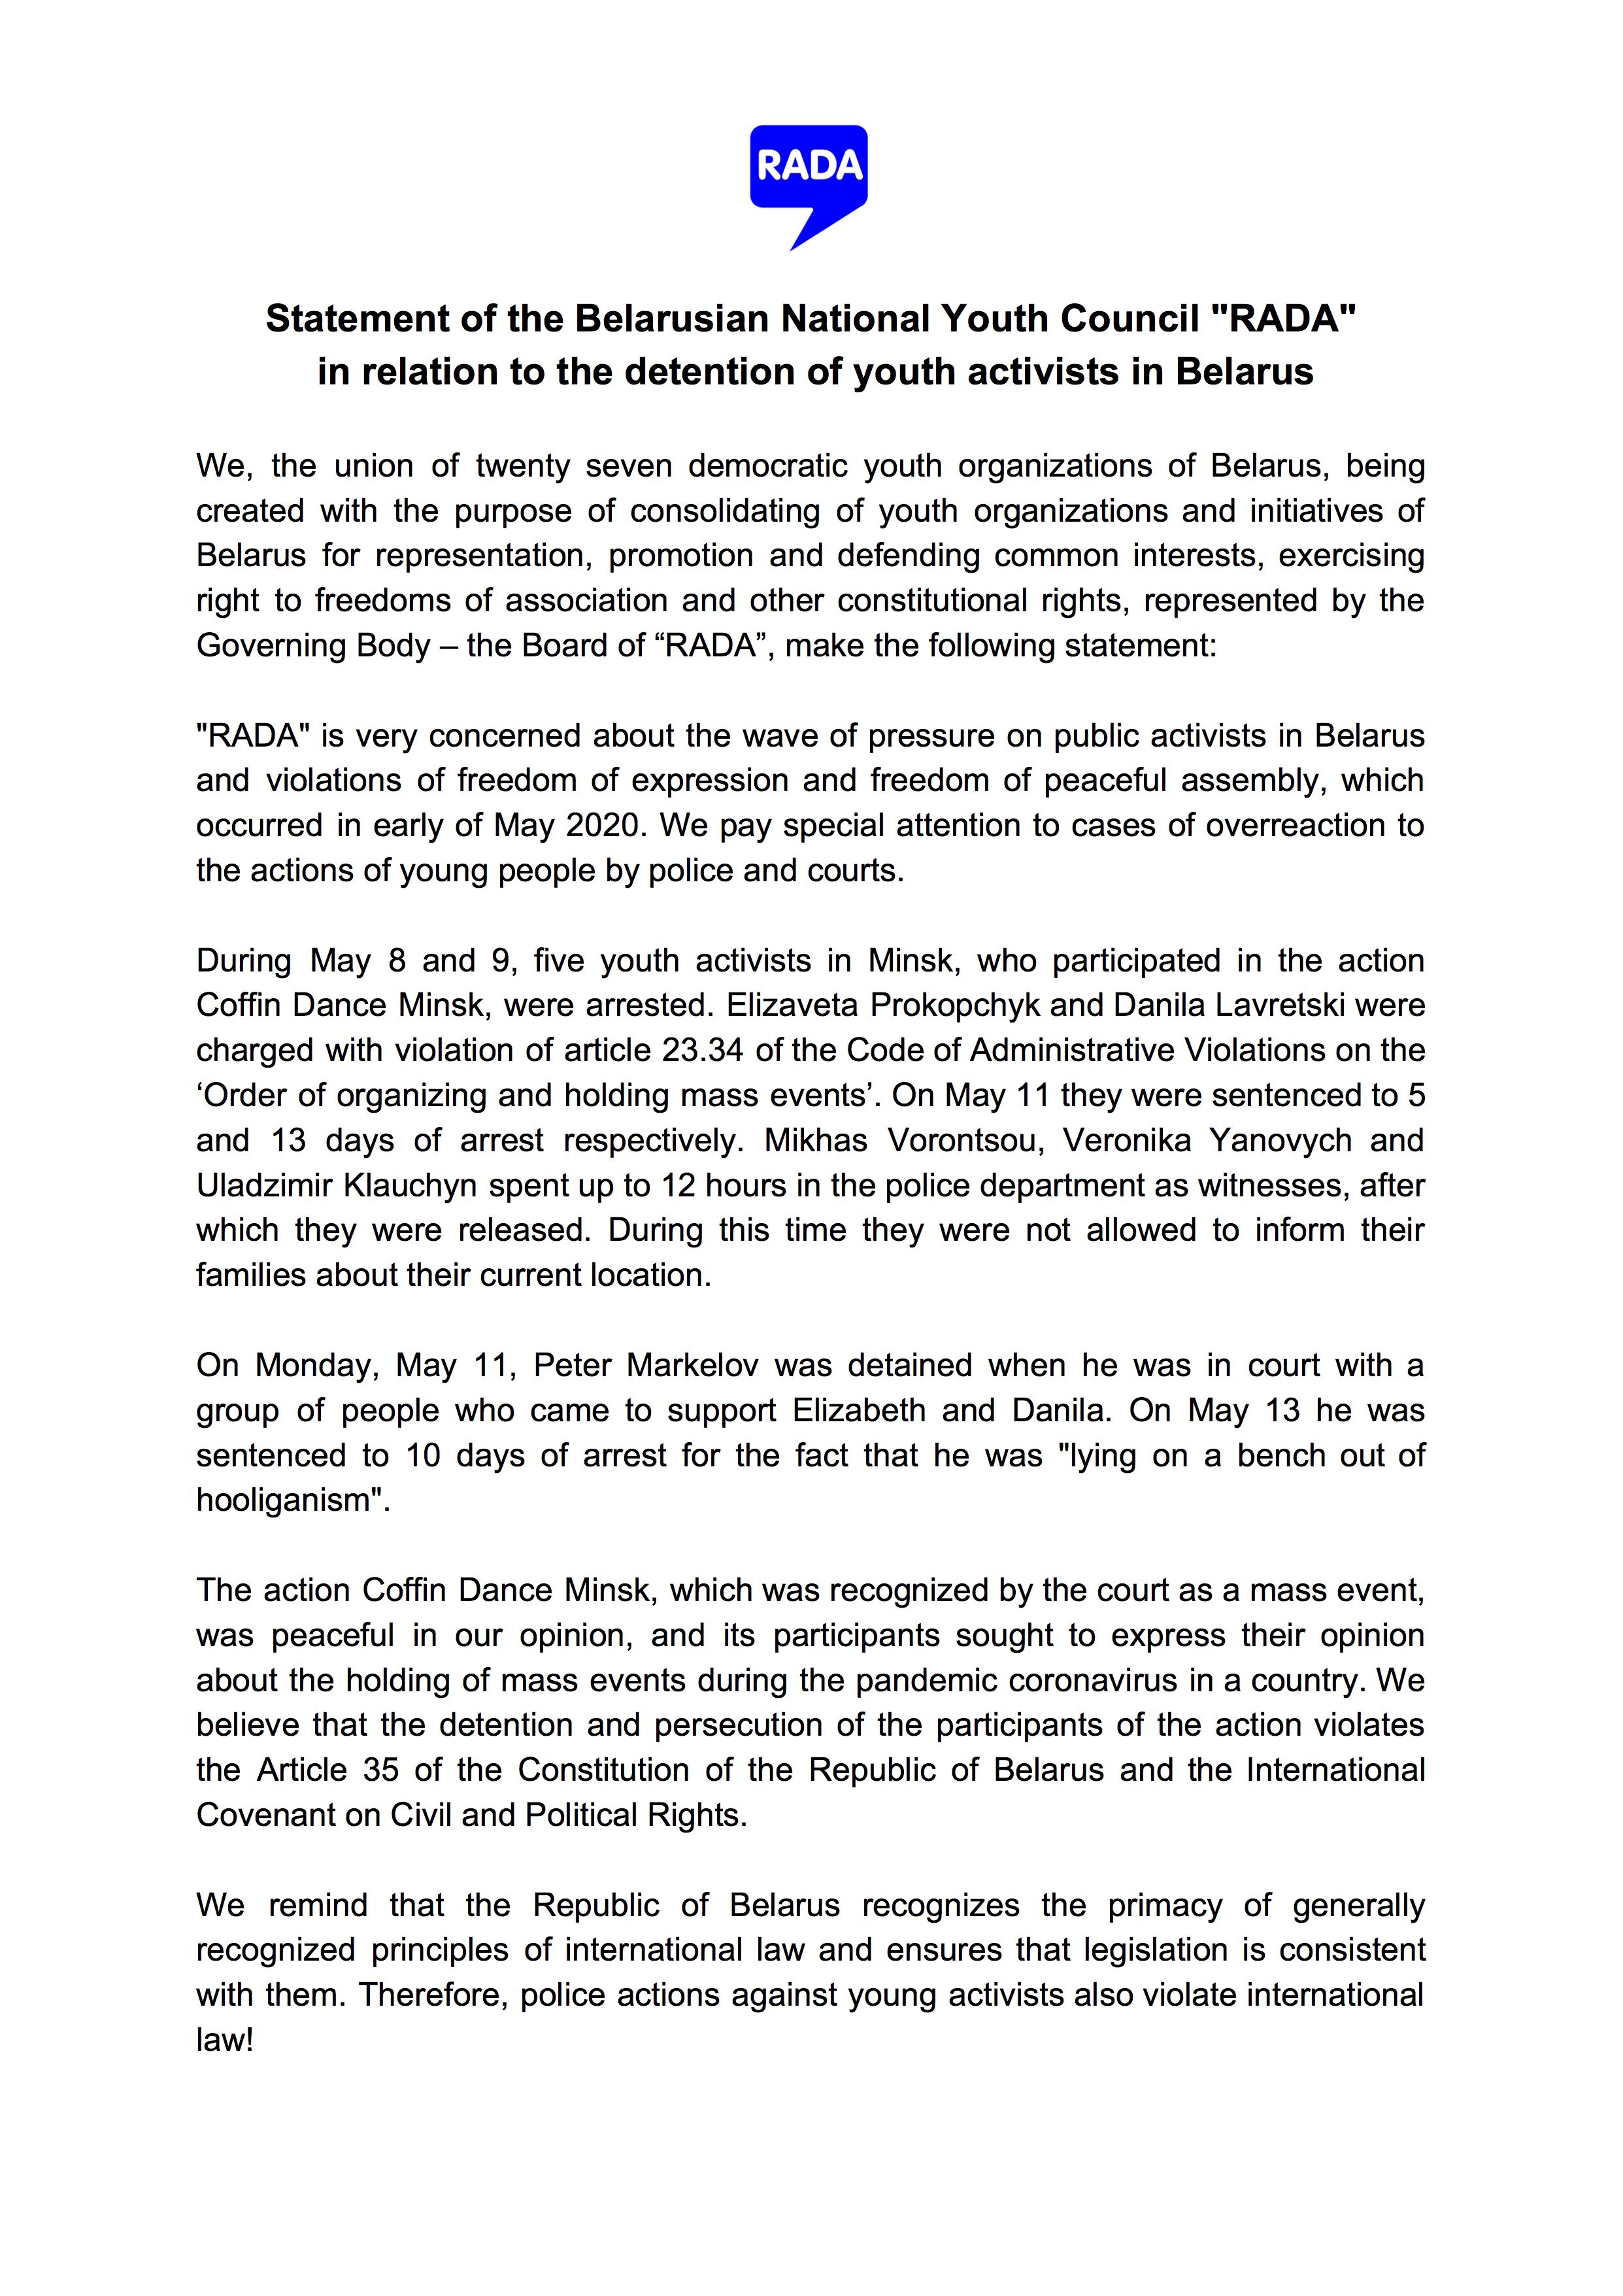 Statement of the Belarusian National Youth Council RADA in relation to the detention of youth activists in Belarus